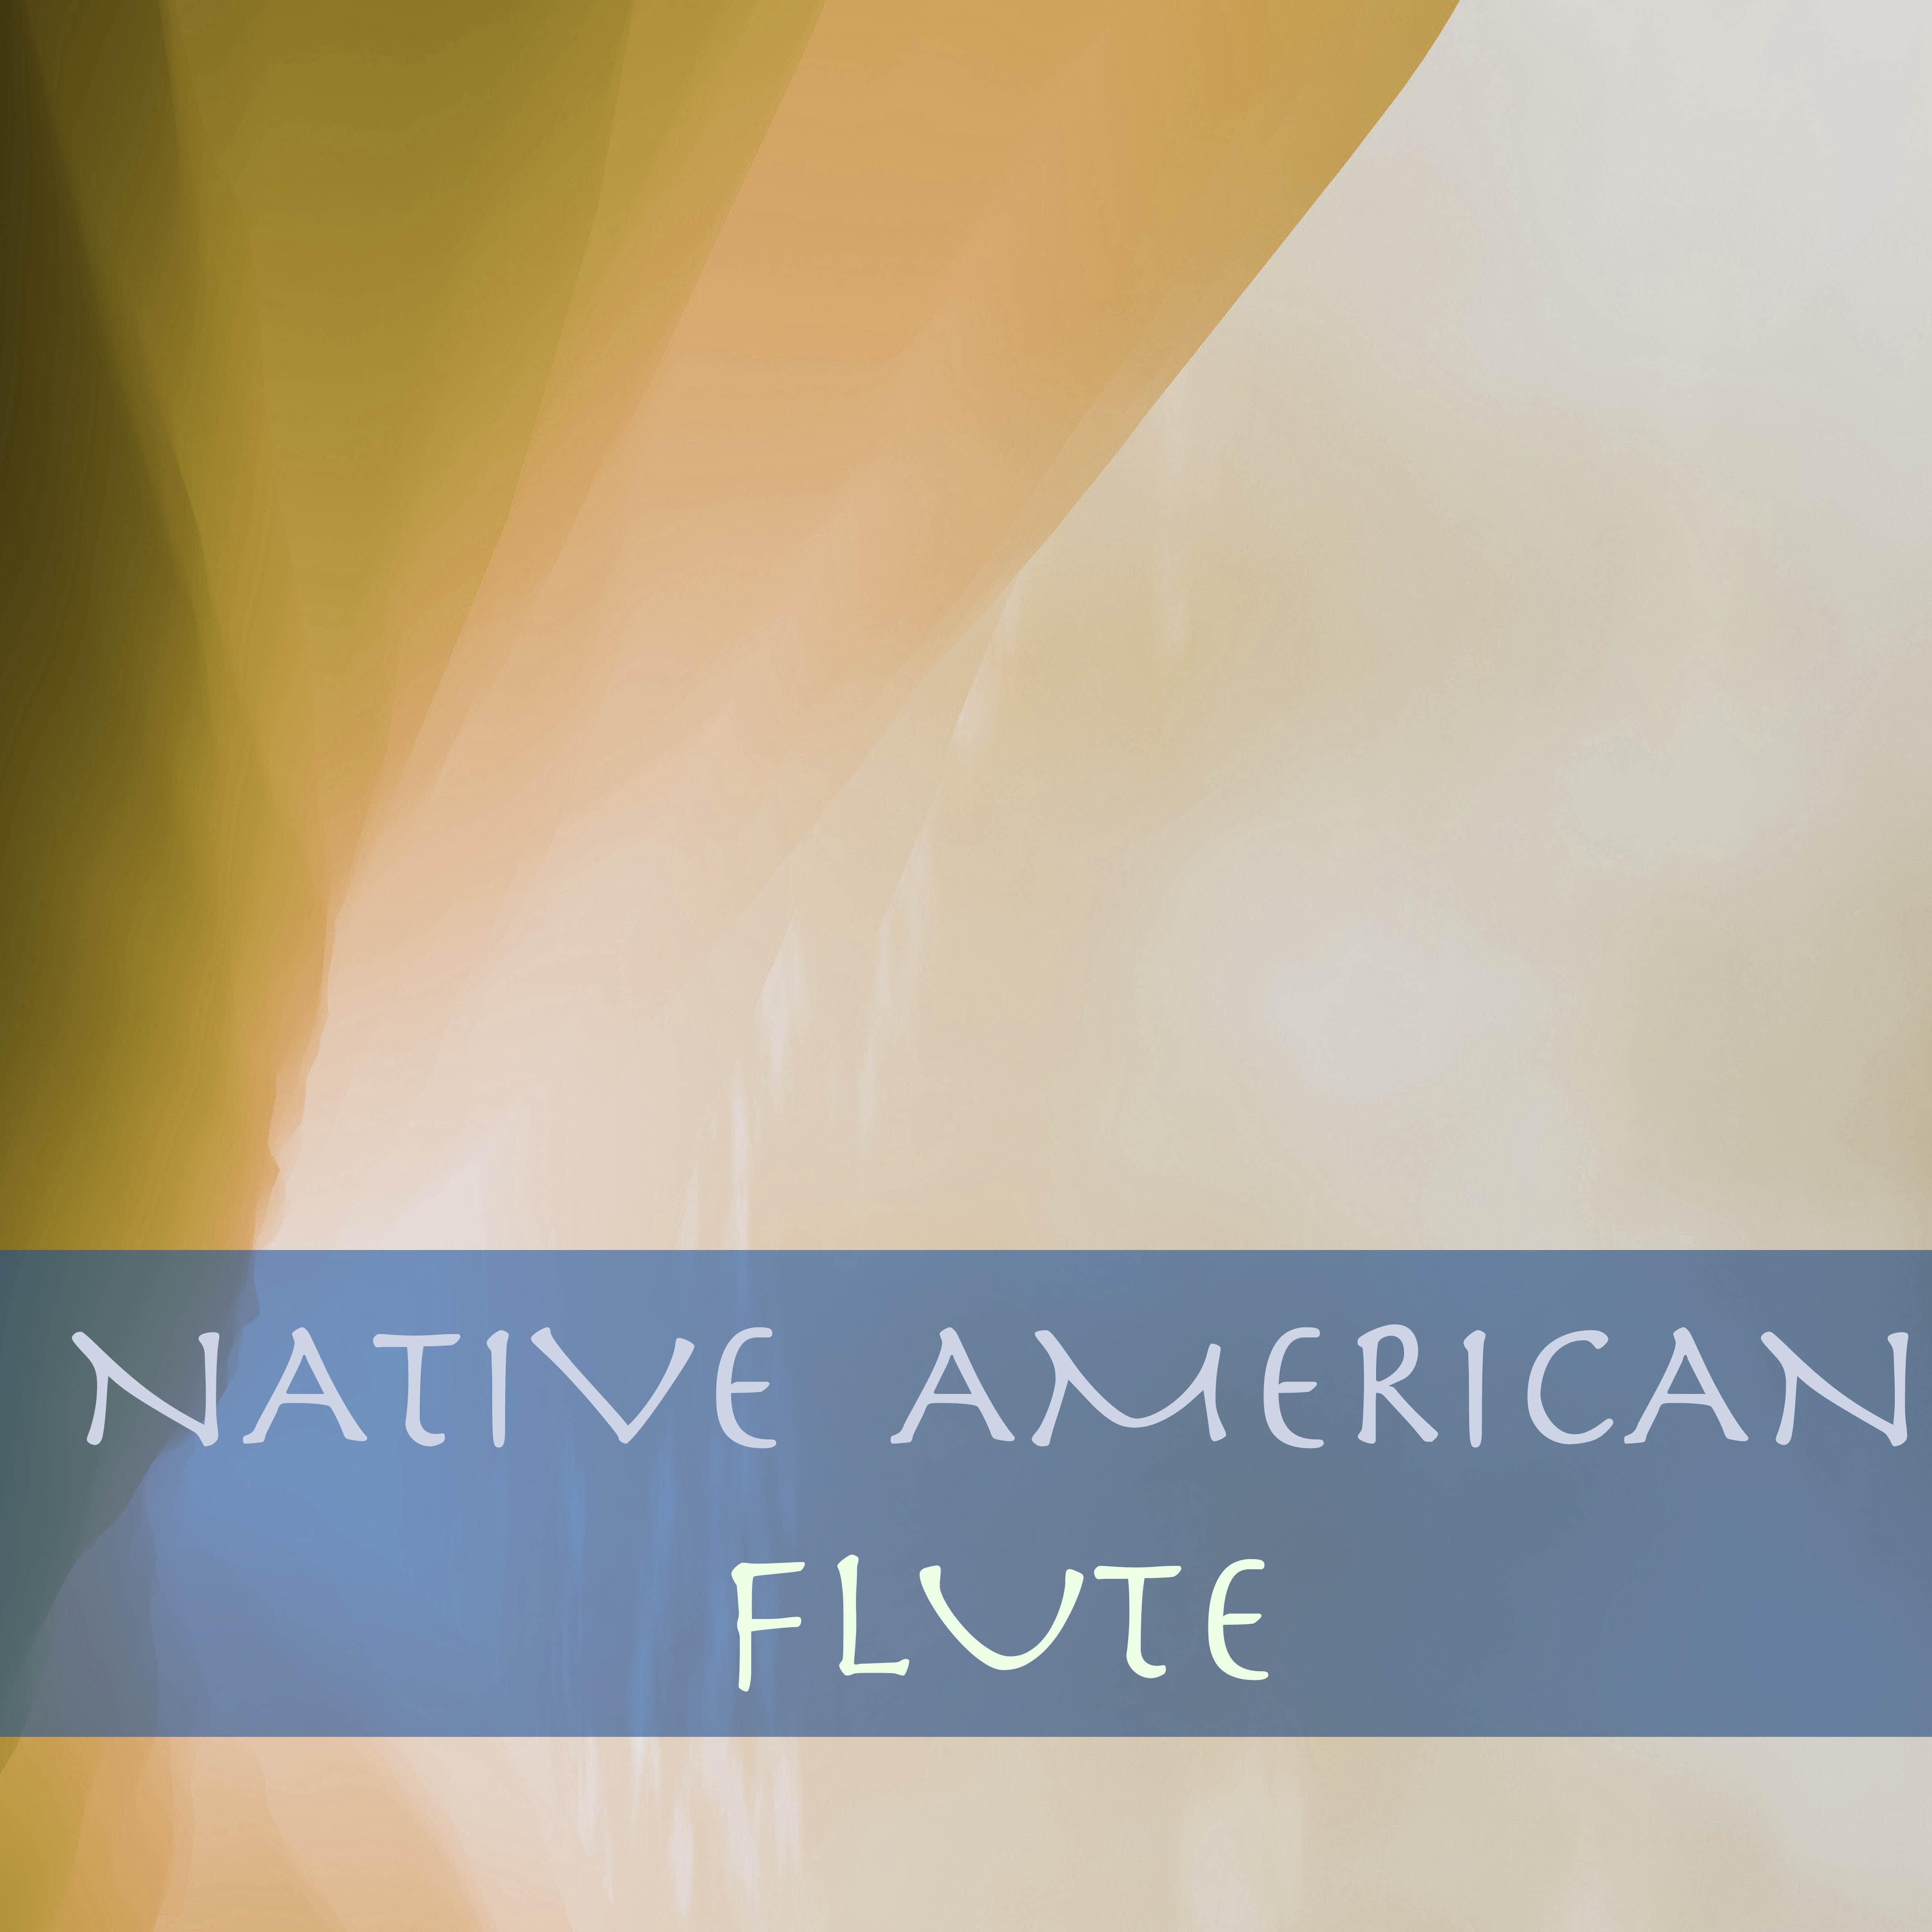 Native American Flute - Massage Healing Songs with Sounds of Nature for Meditation, Sleep & Relaxation